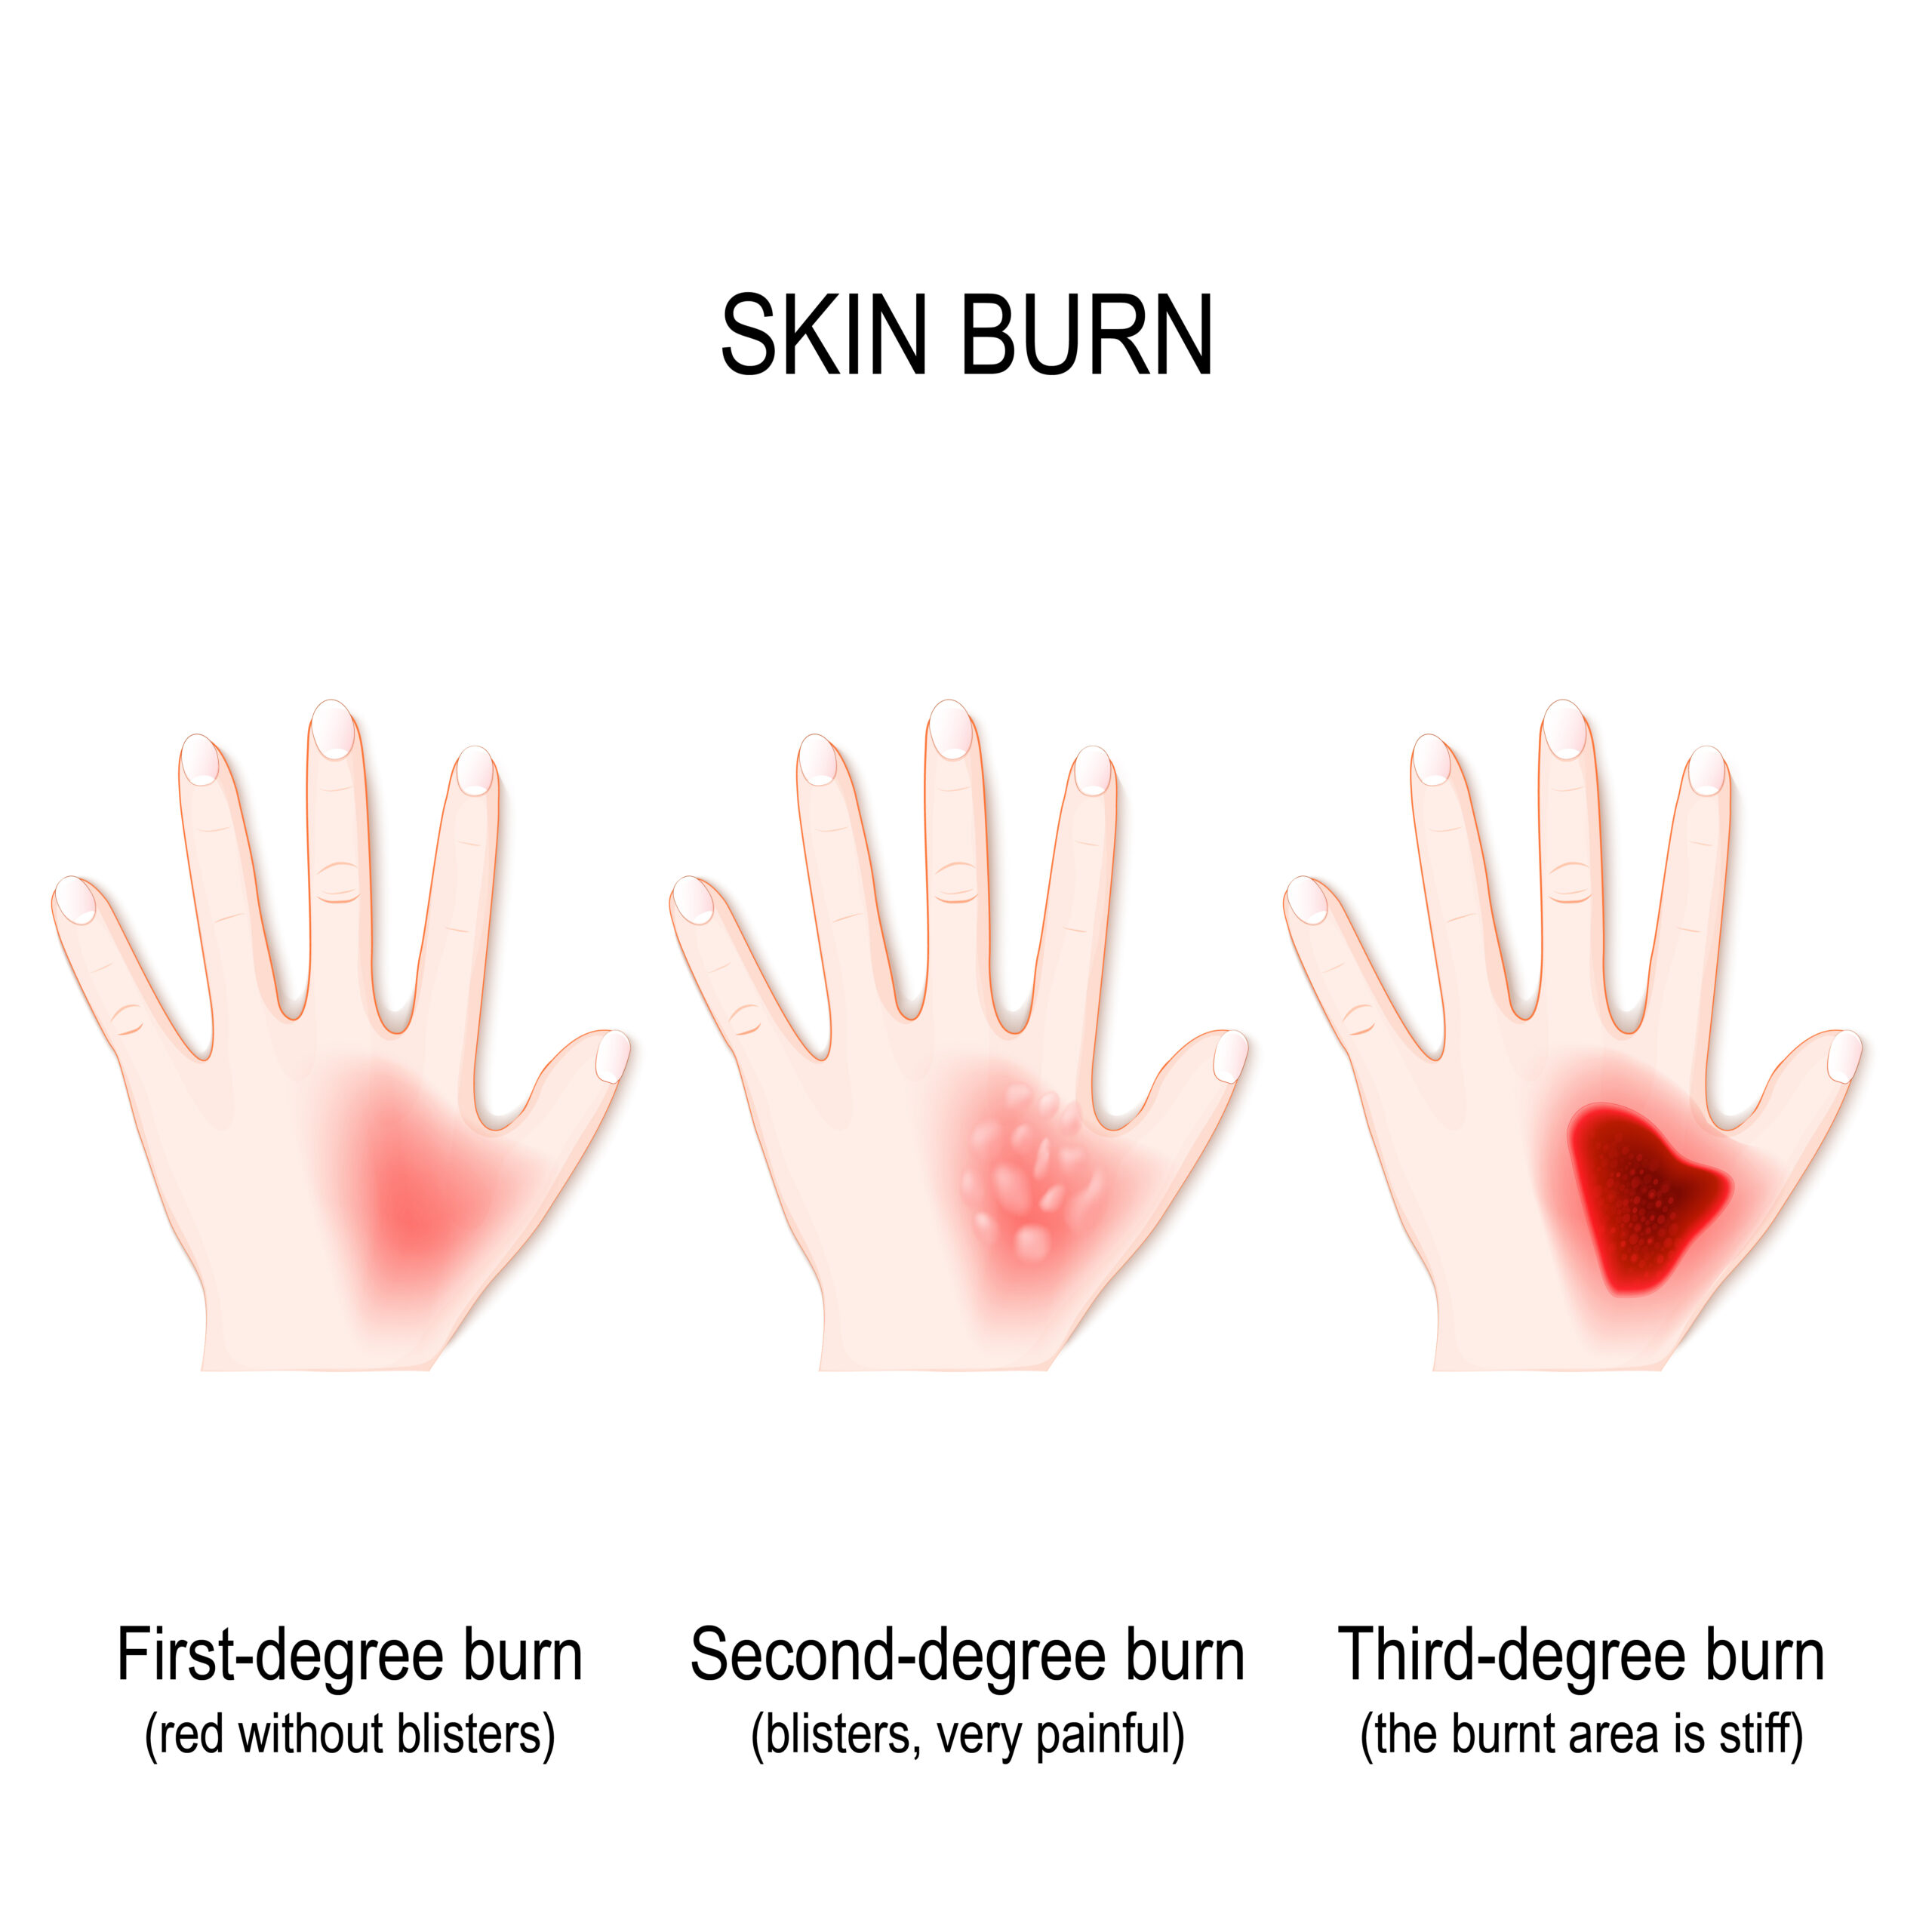 BURNS - Chemical burns from cement, acids, or drain cleaners